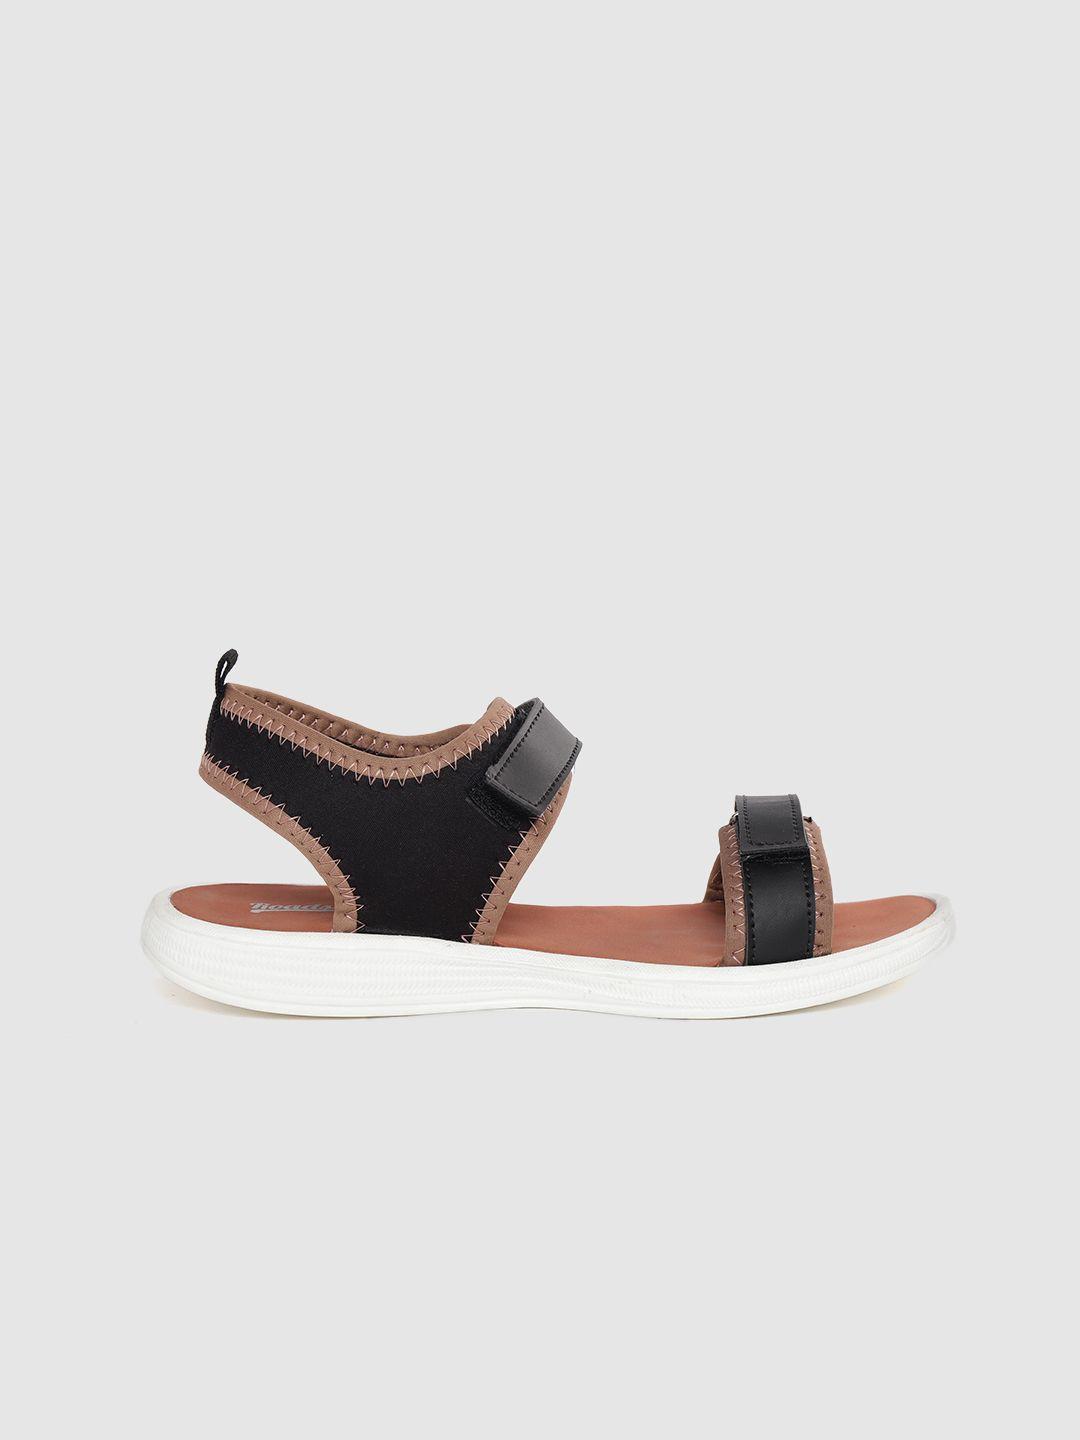 the roadster lifestyle co women black & brown sports sandals